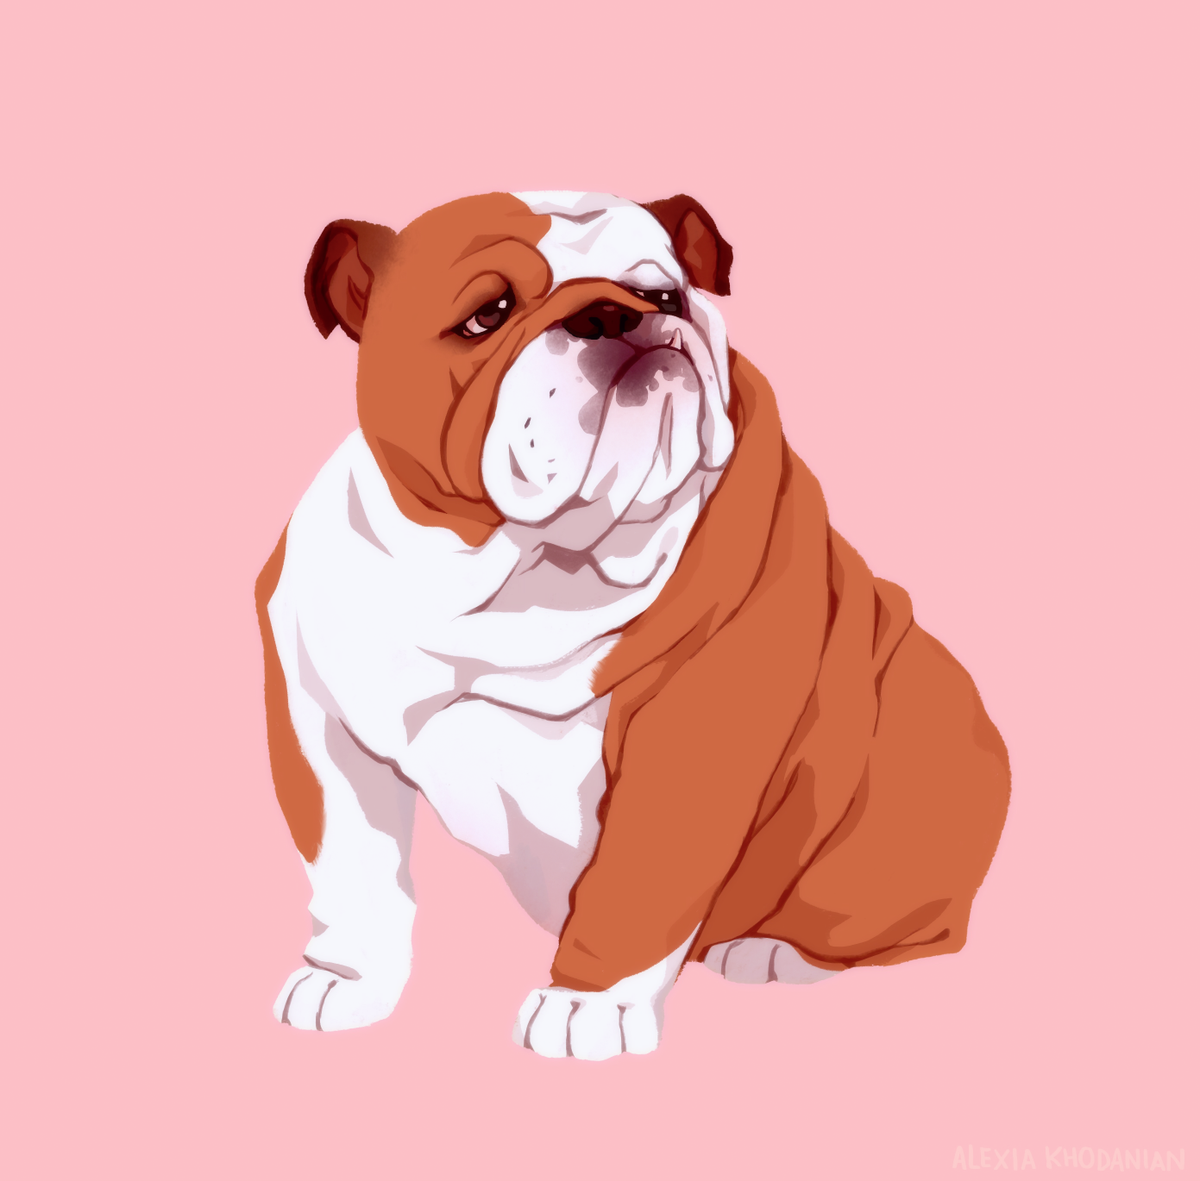  #doggust day 4 from yesterday, well technically last year's yesterday: bulldog!